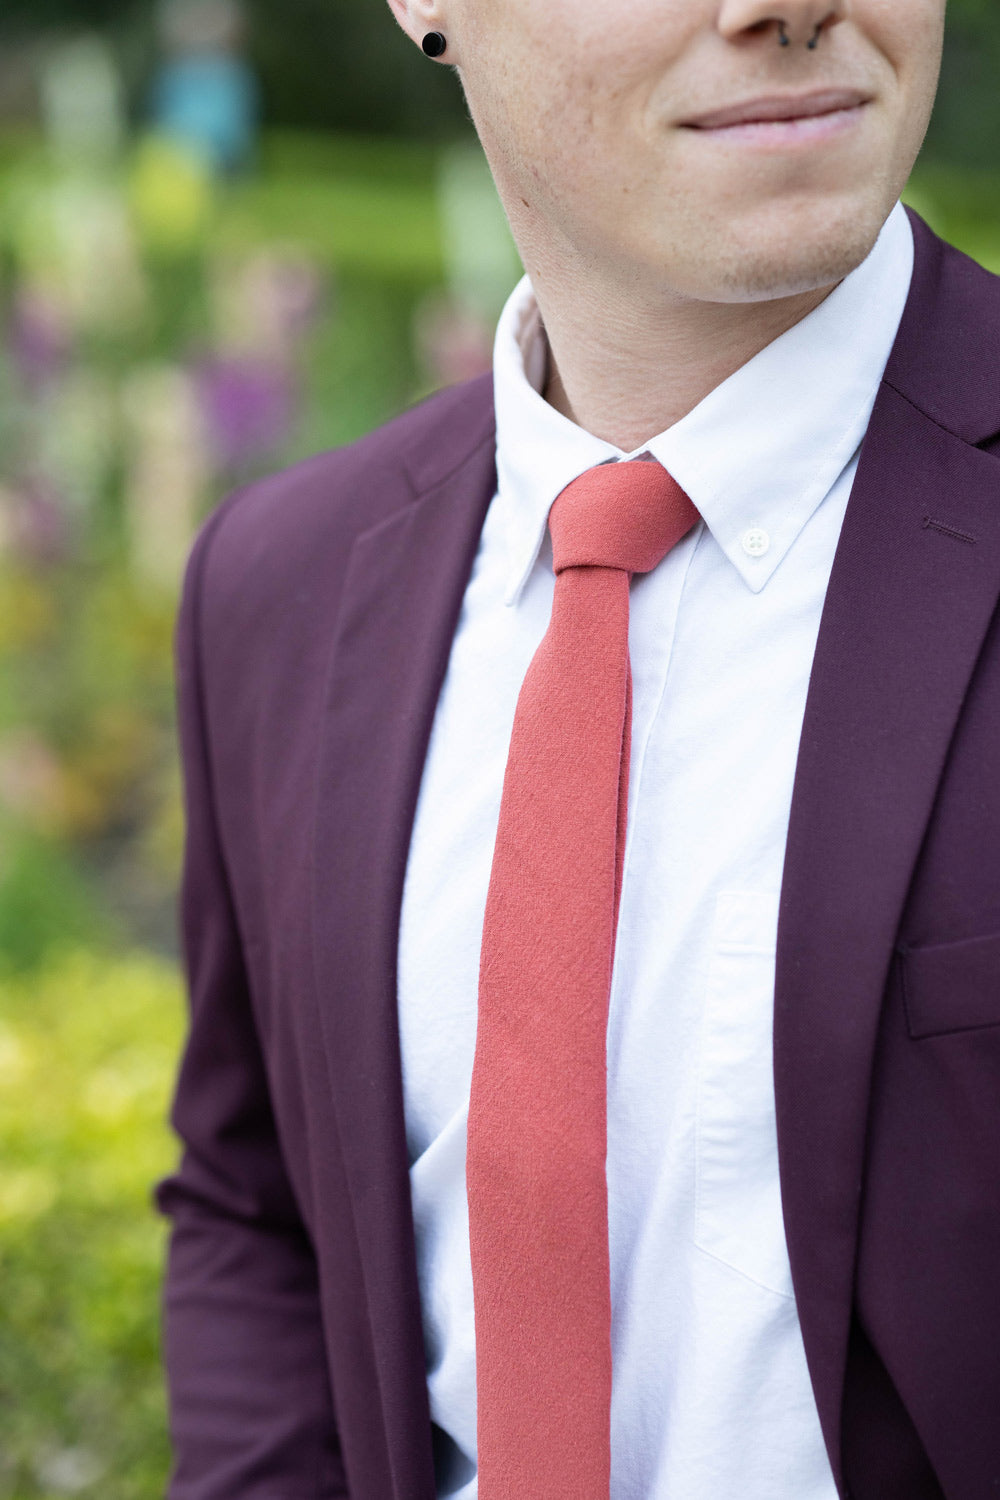 Spice necktie worn with a white shirt and plum purple suit. 